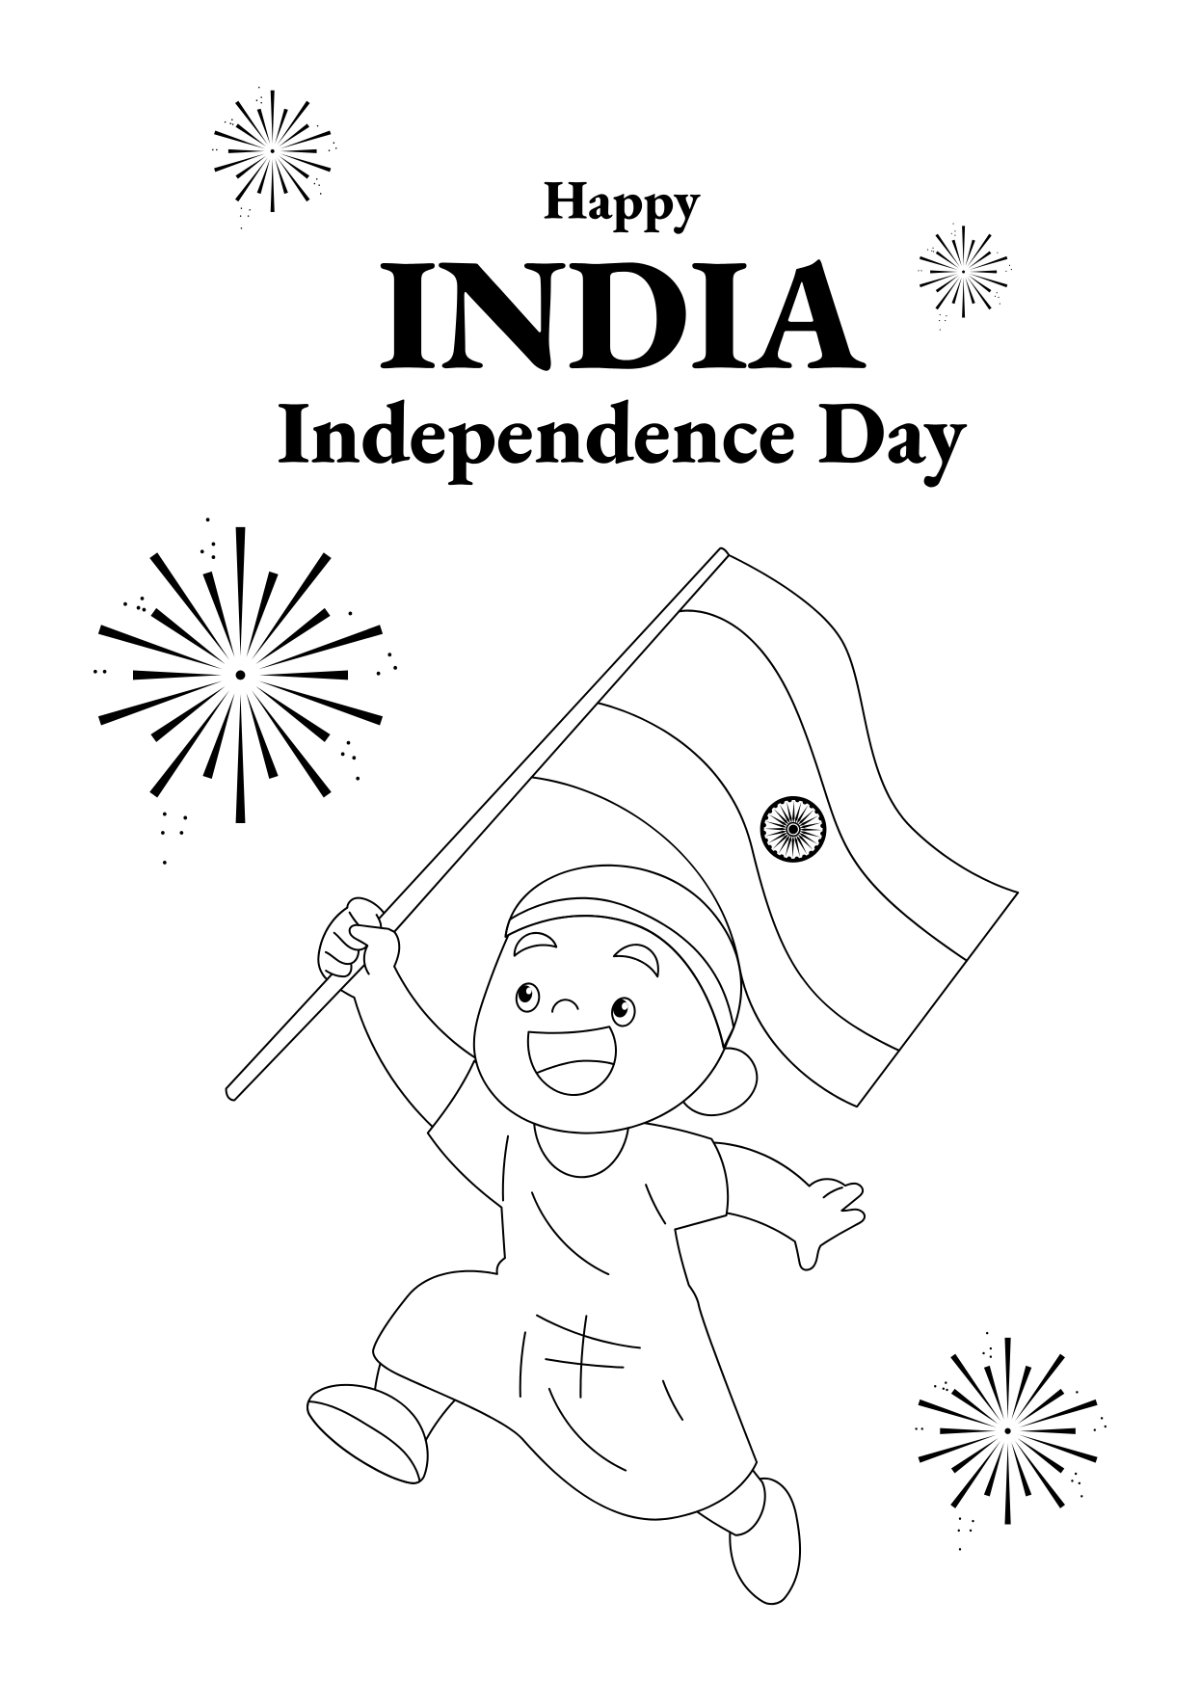 India Independence Day Drawing for Kids